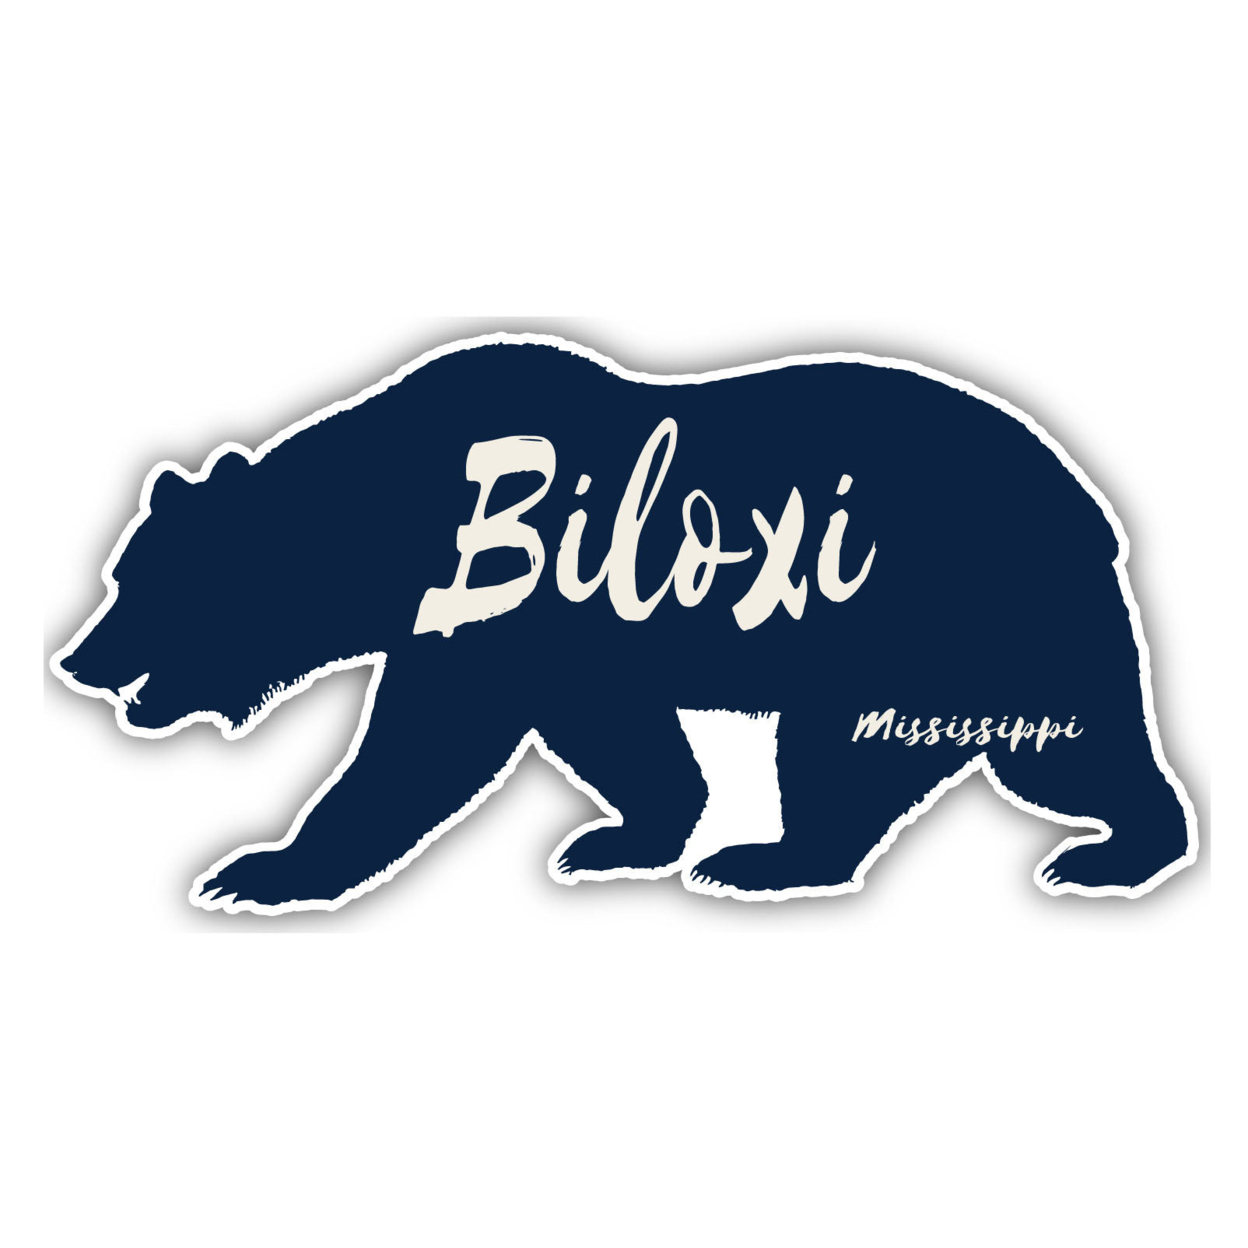 Biloxi Mississippi Souvenir Decorative Stickers (Choose Theme And Size) - 4-Pack, 2-Inch, Camp Life